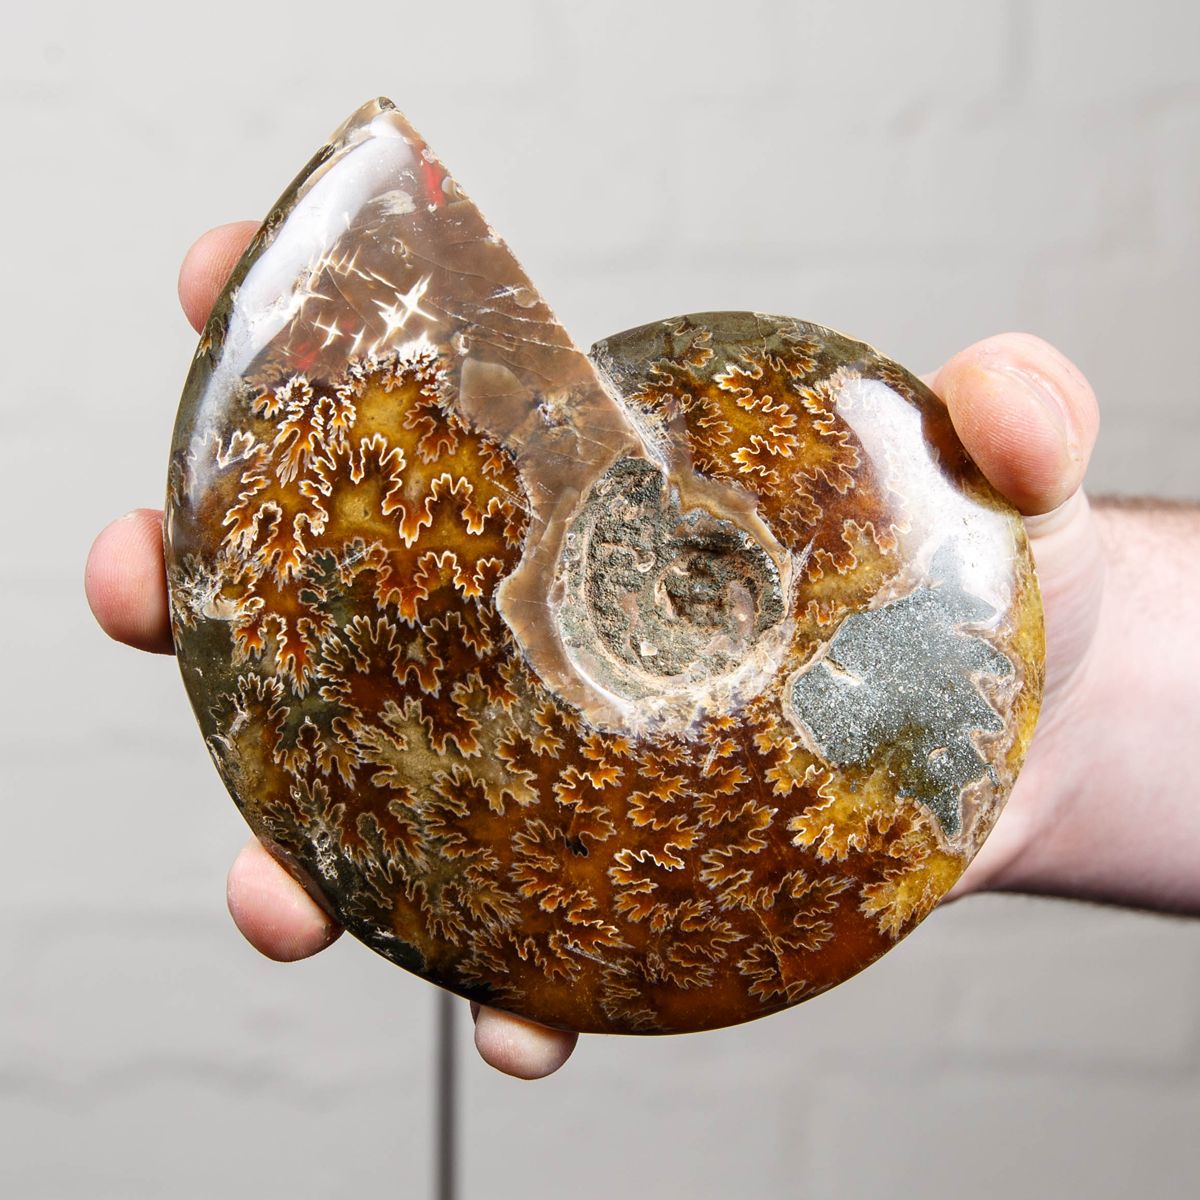 5.1 inch Whole Polished Ammonite Fossil on Stand (Cleoniceras sp)